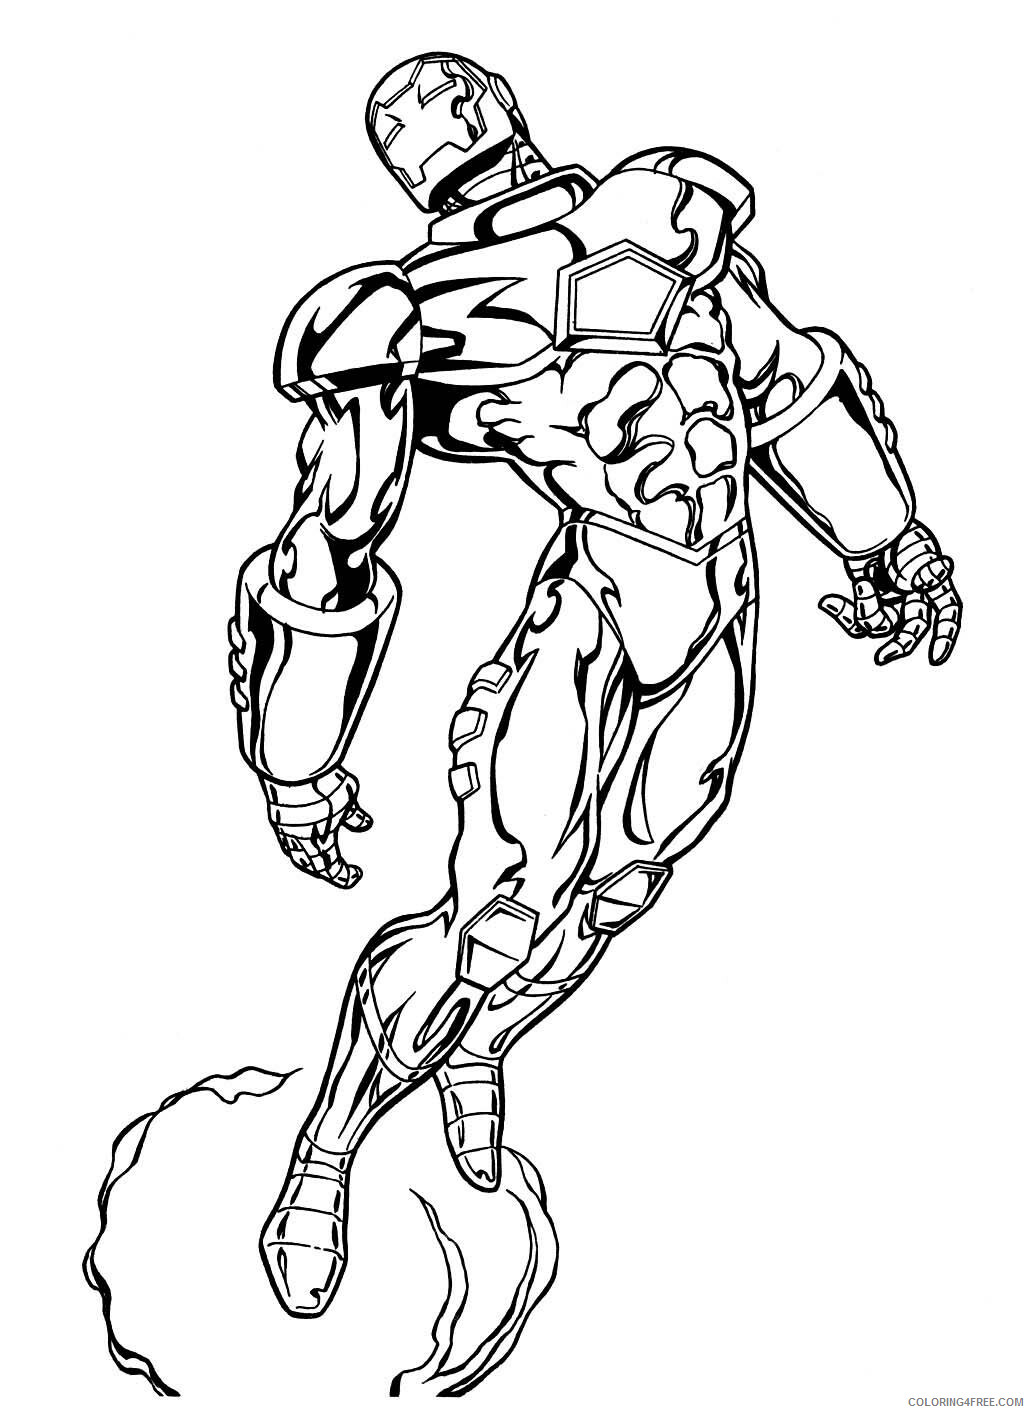 Marvel Coloring Pages TV Film Marvel Free Printable 2020 04858 Coloring4free